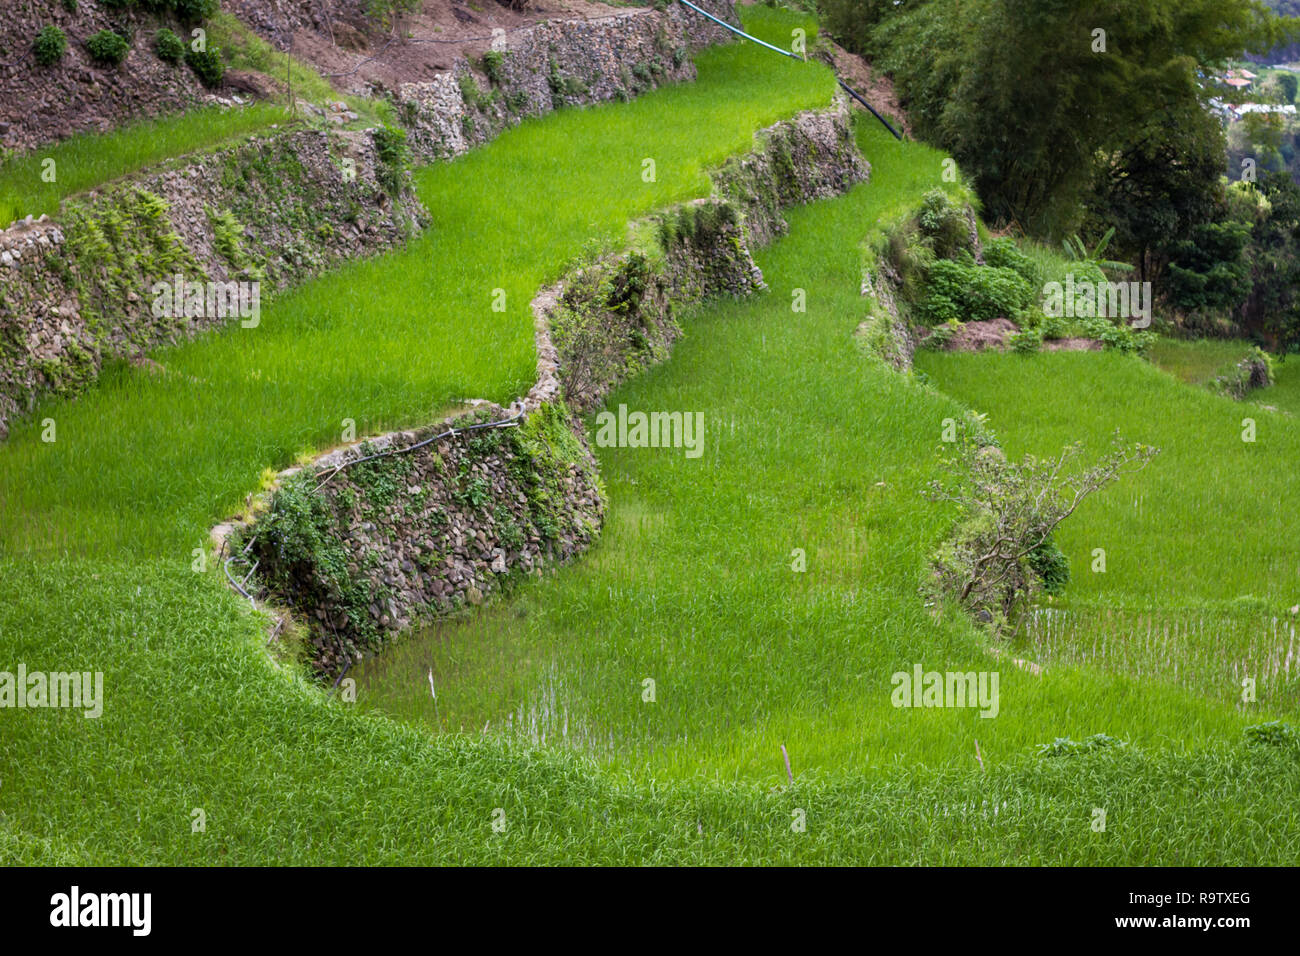 Amazing Banaue Rice Terraces in the Philippines, used by farmers for rice production. Tourist attraction sometimes called Eighth Wonder of the World. Stock Photo